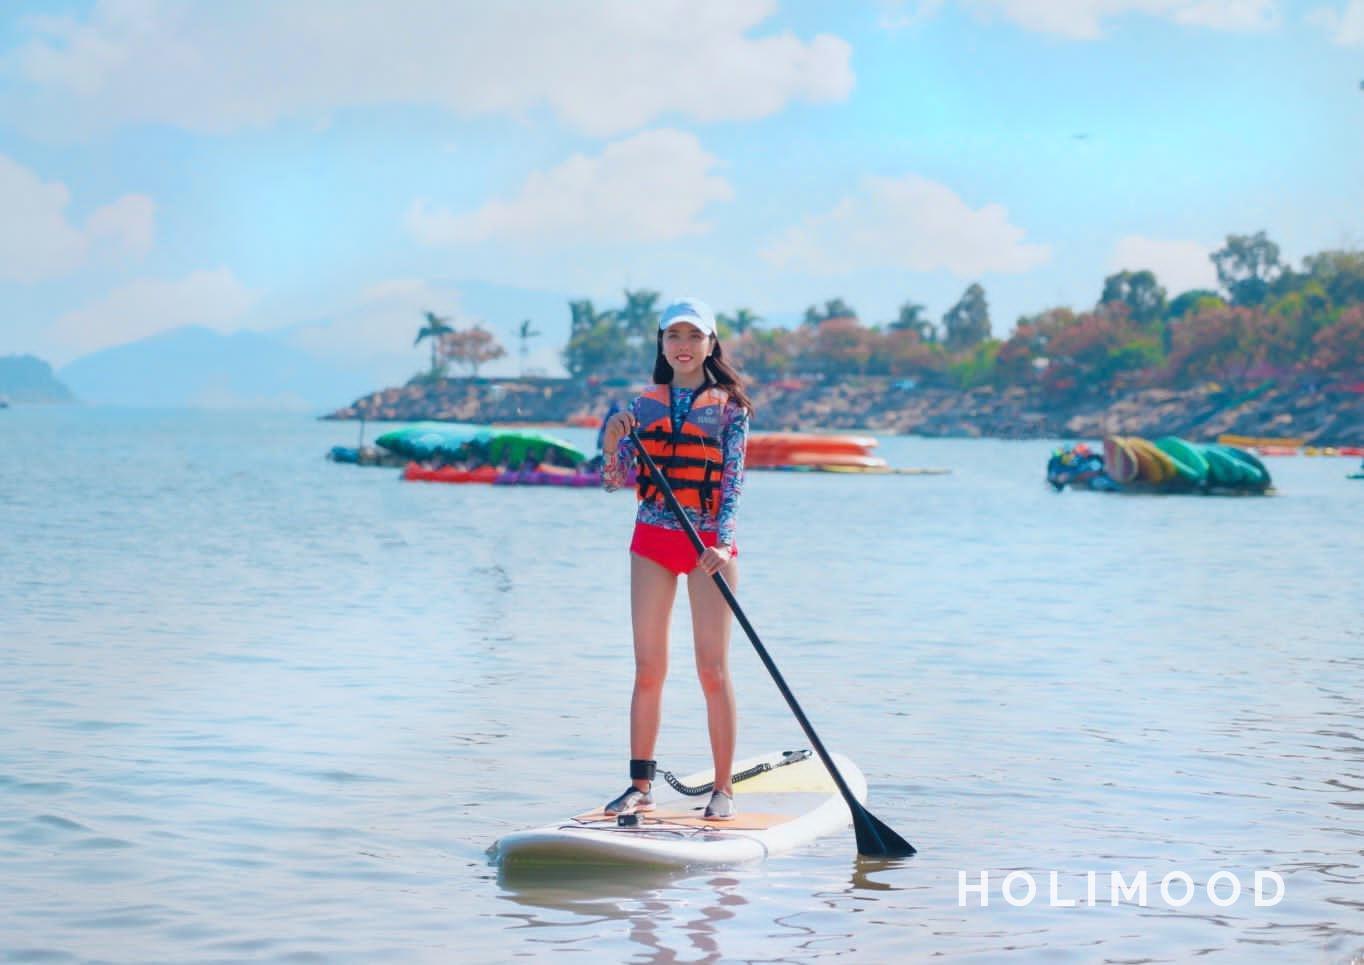 Explorer Hong Kong (Family Package) - SUP board Experience 4